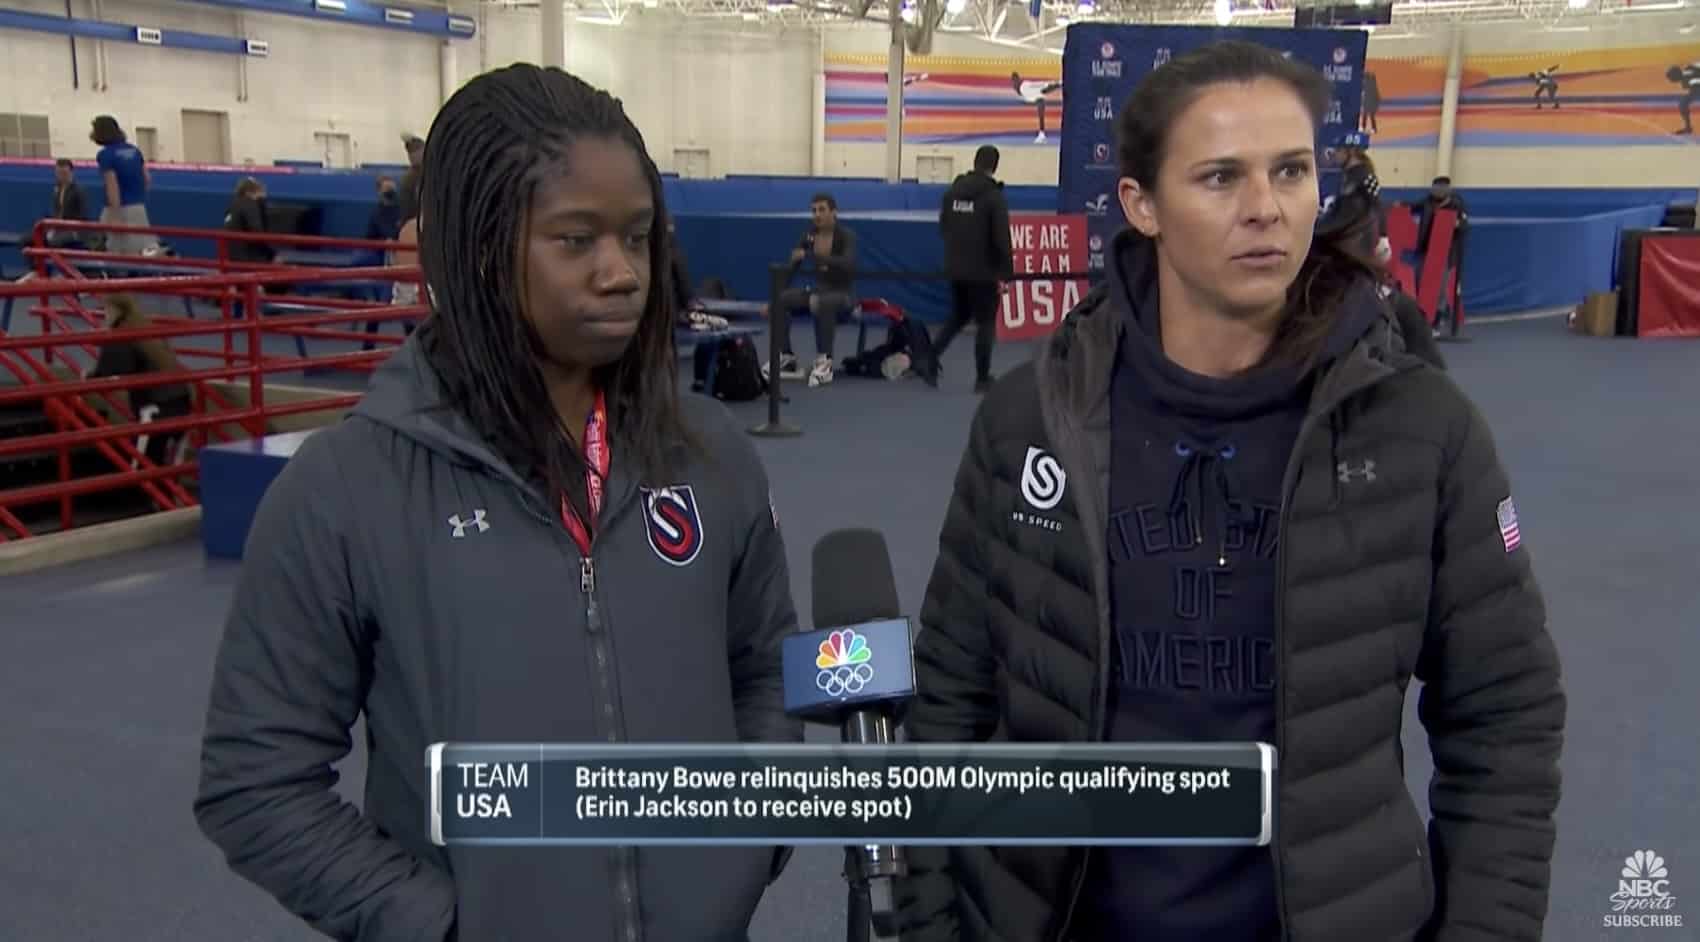 erin jackson and brittany bowe